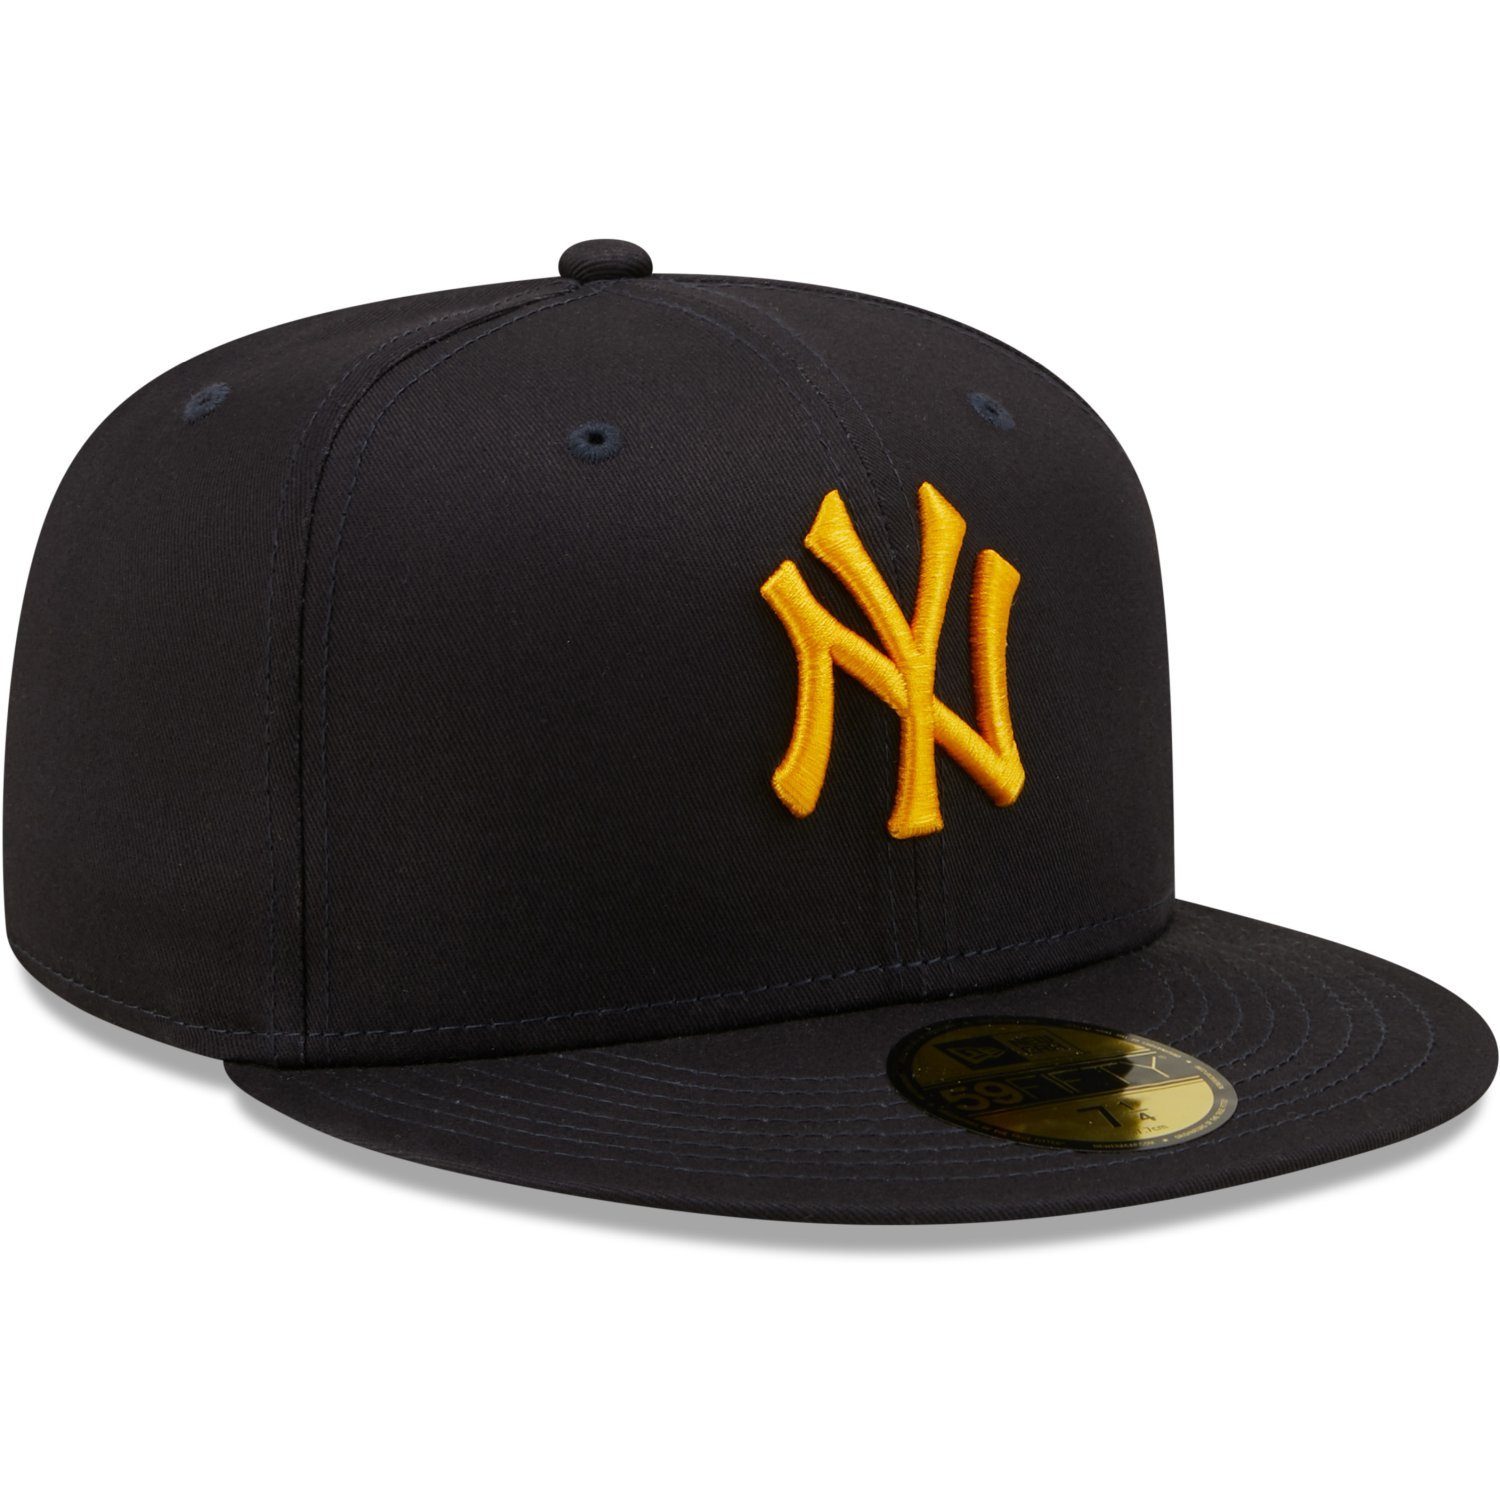 New Era 59Fifty Yankees York gold New Cap Fitted